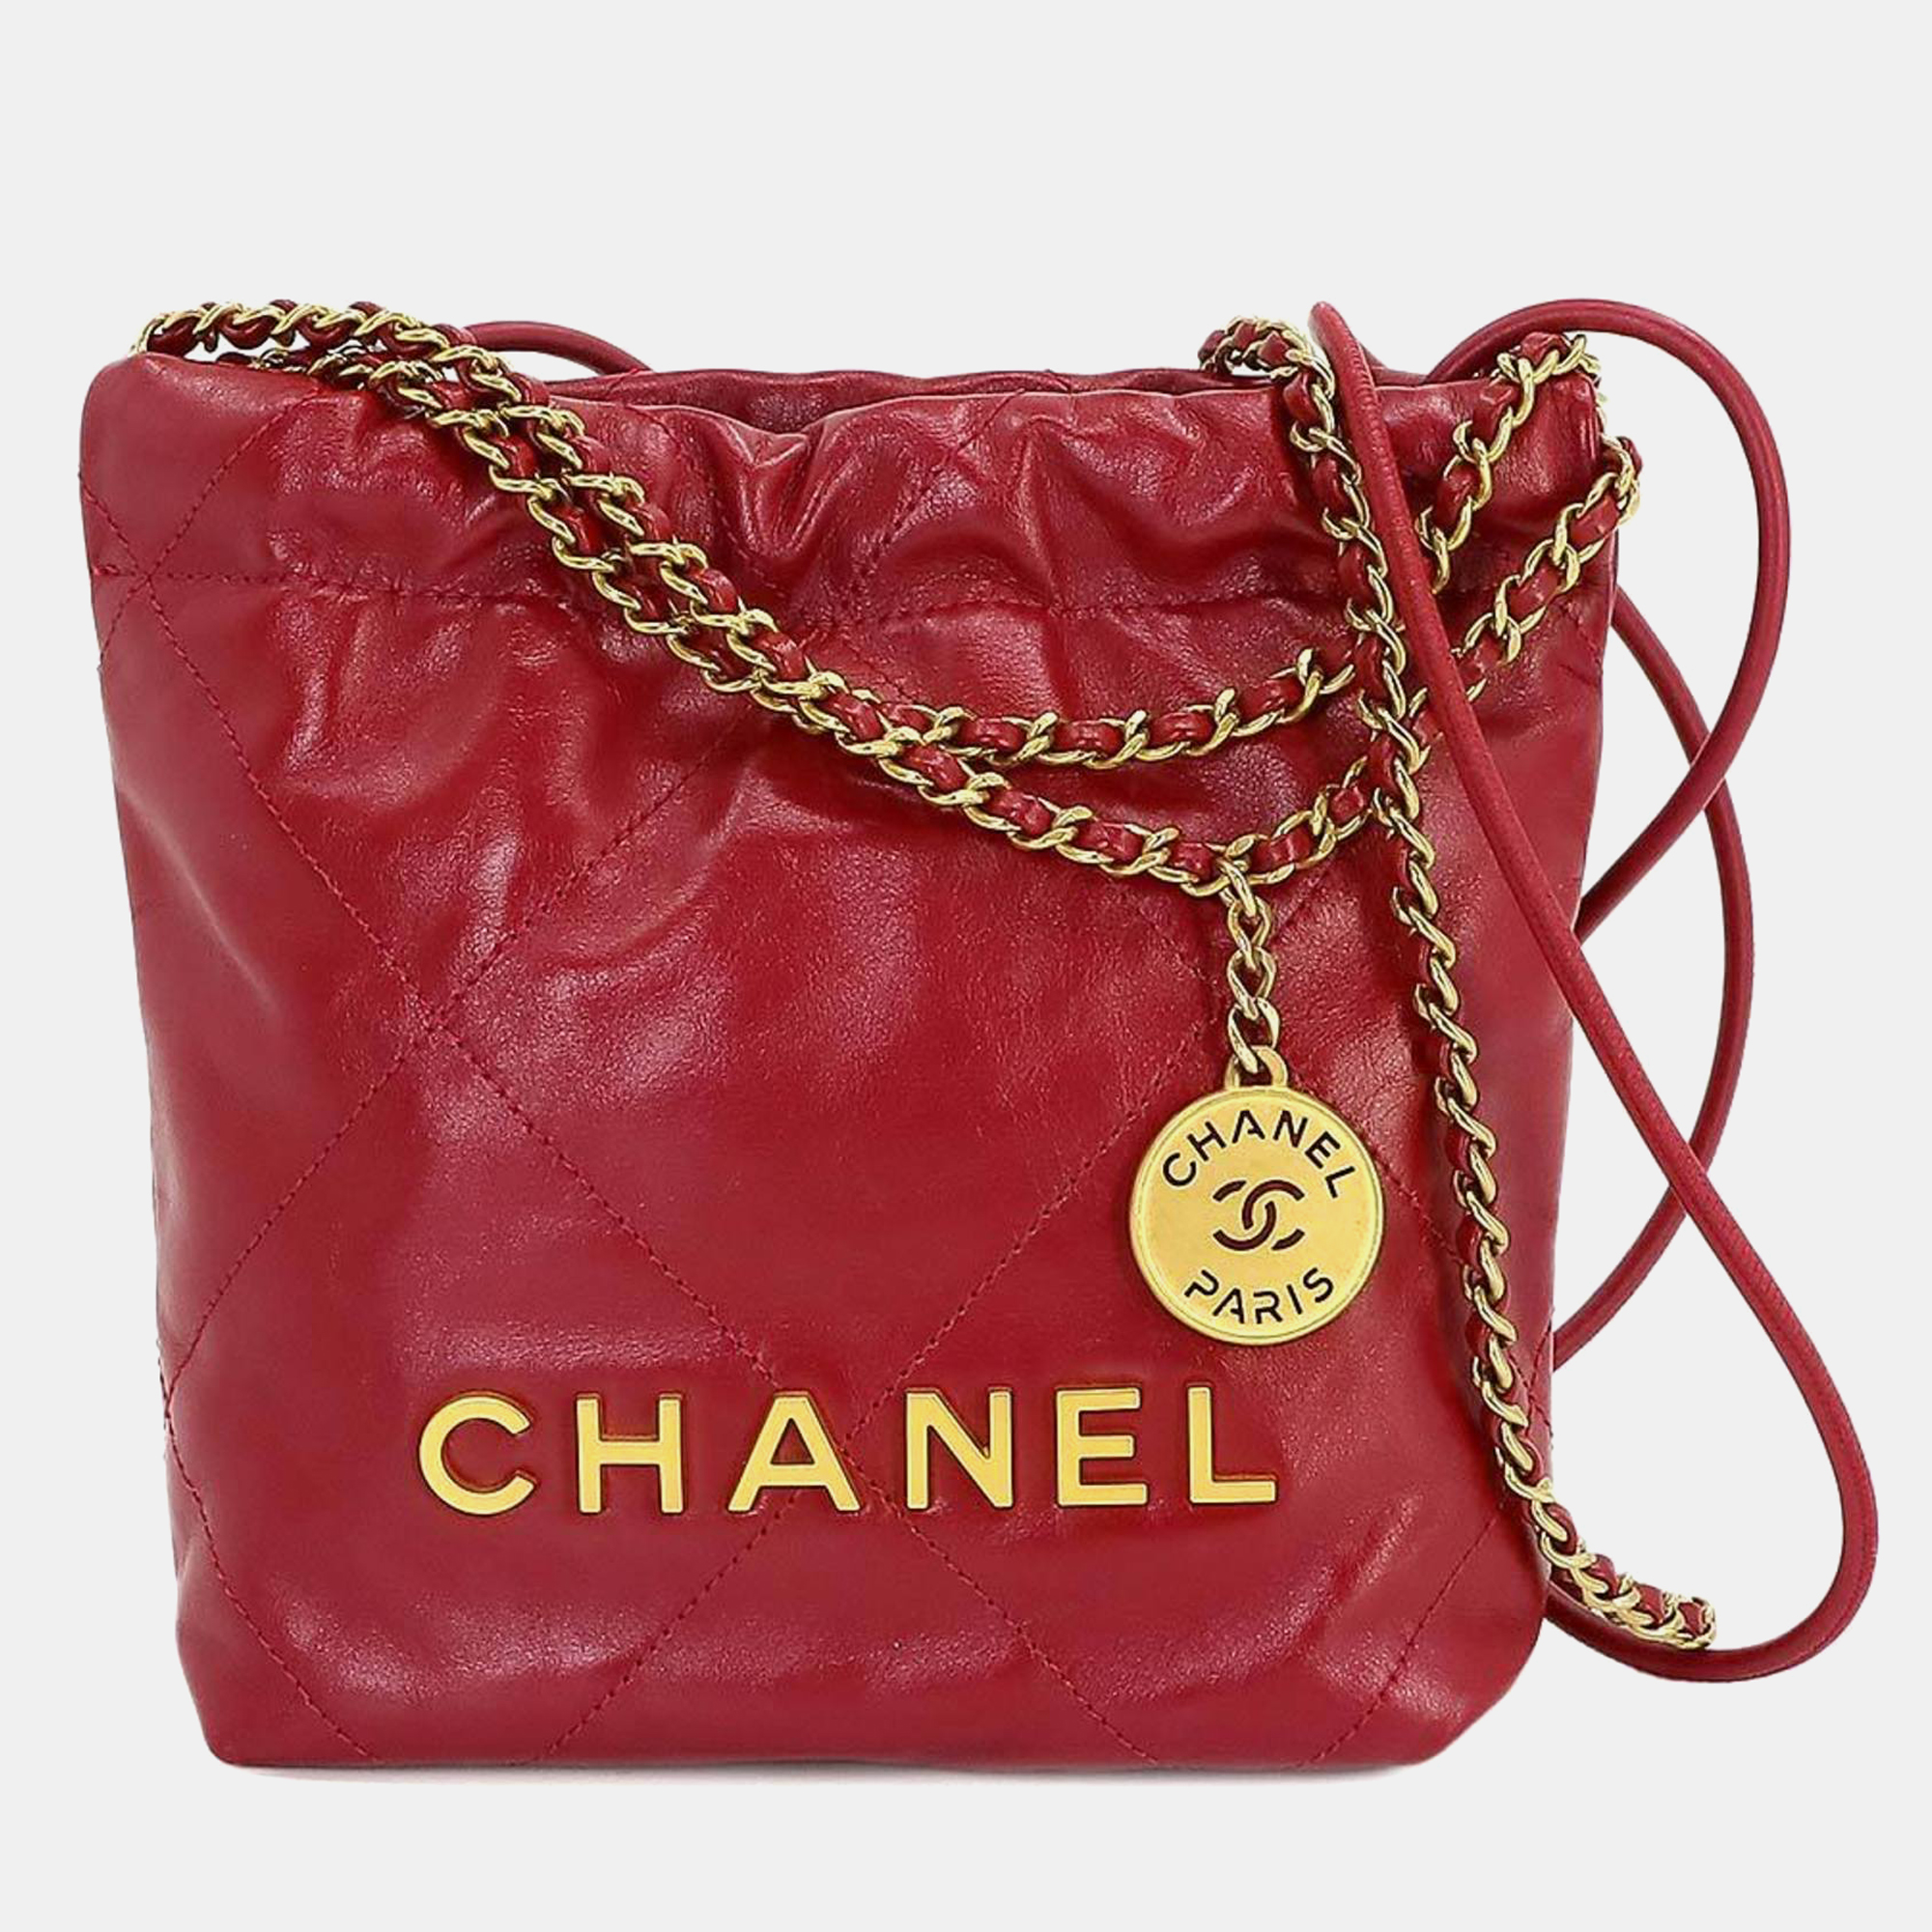 Chanel red leather small 22 hobos